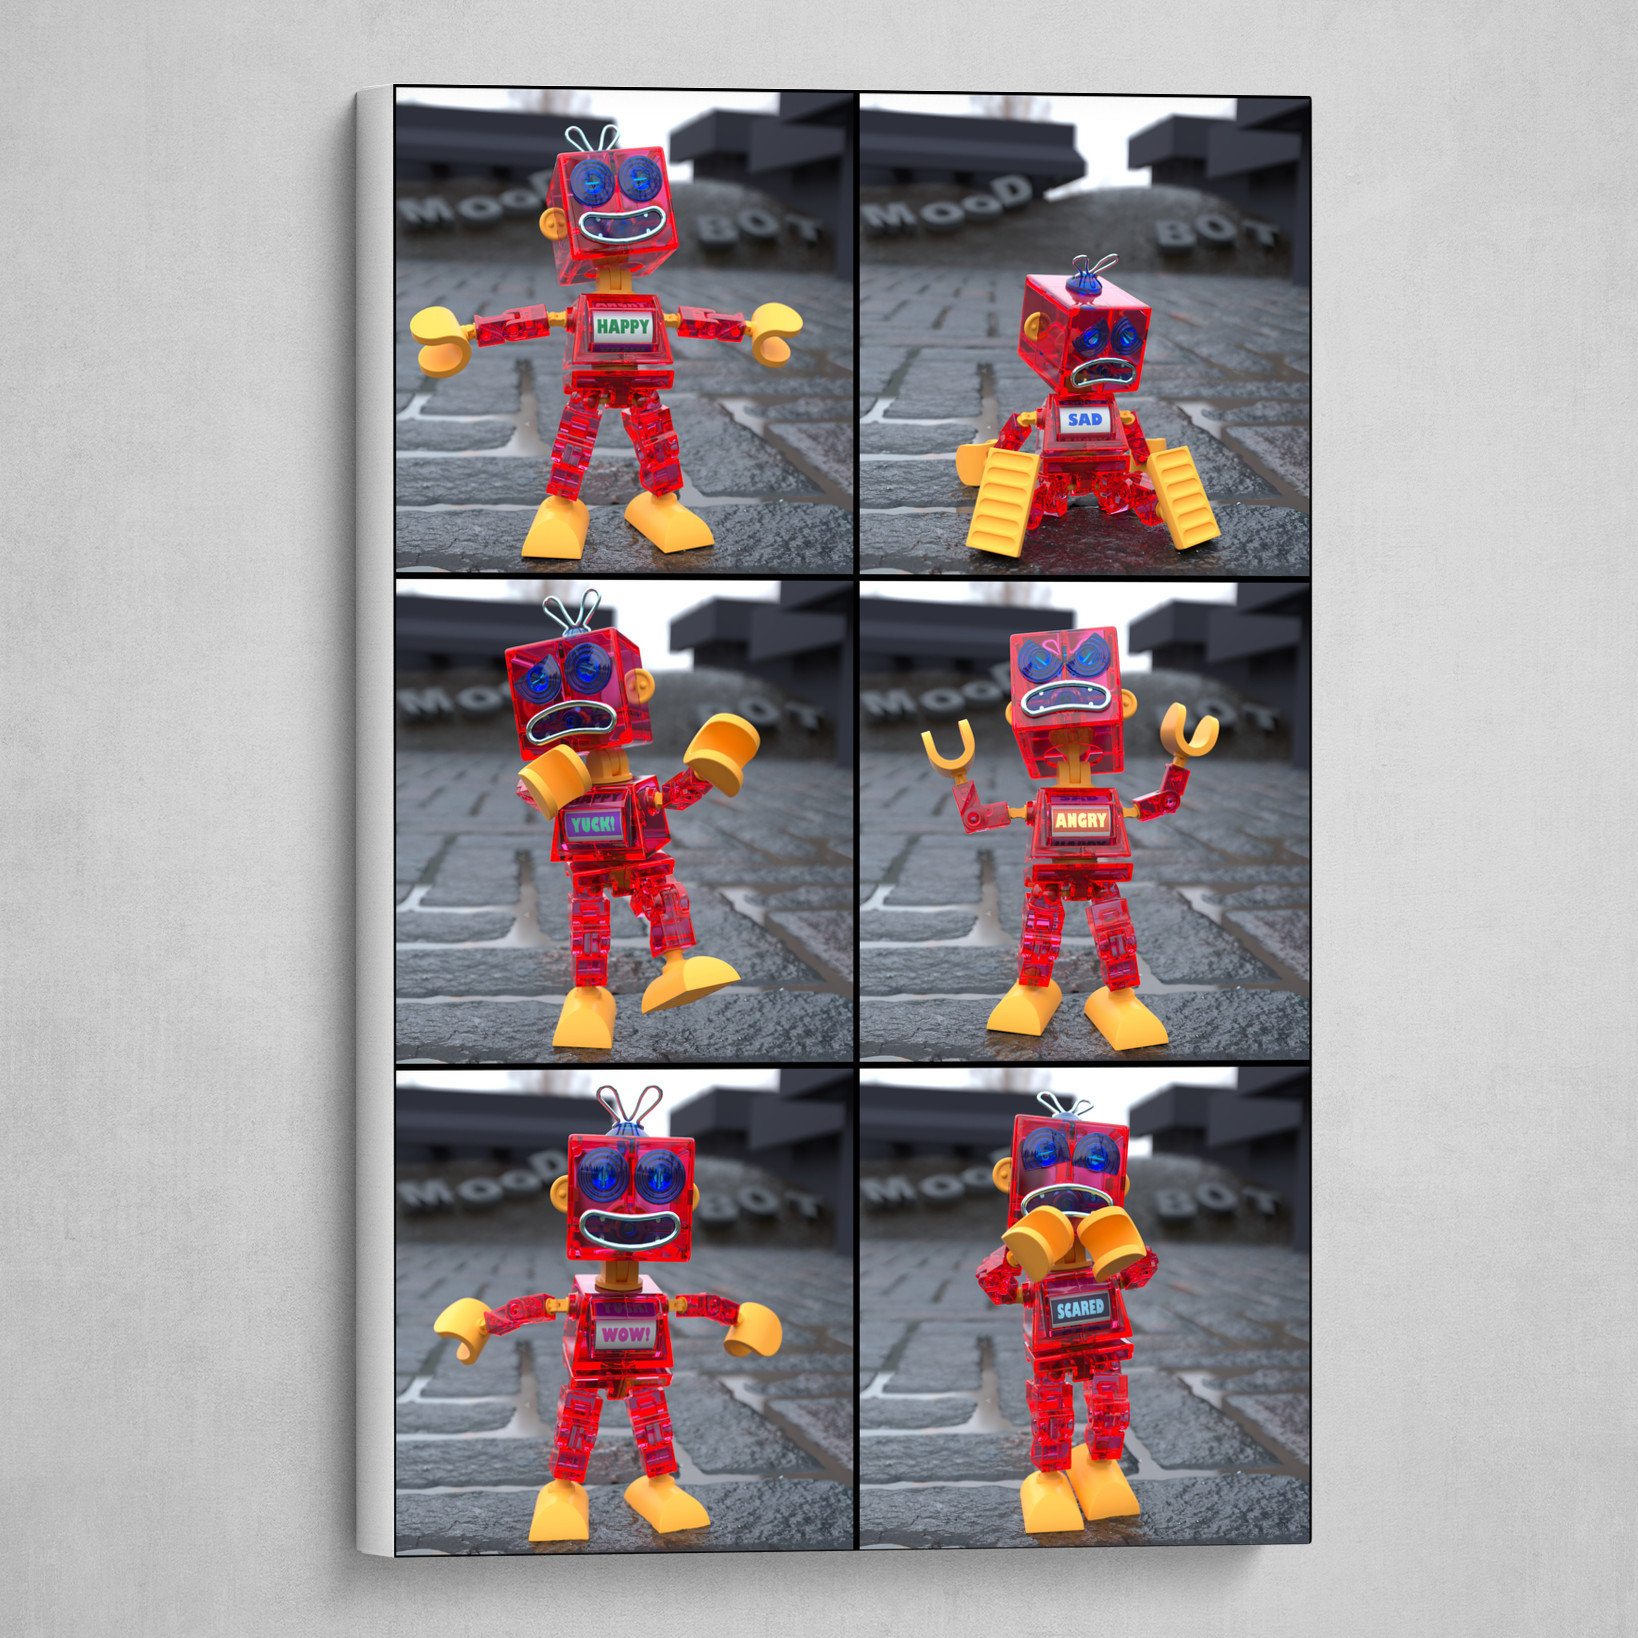 Six moods of a Toy Robot